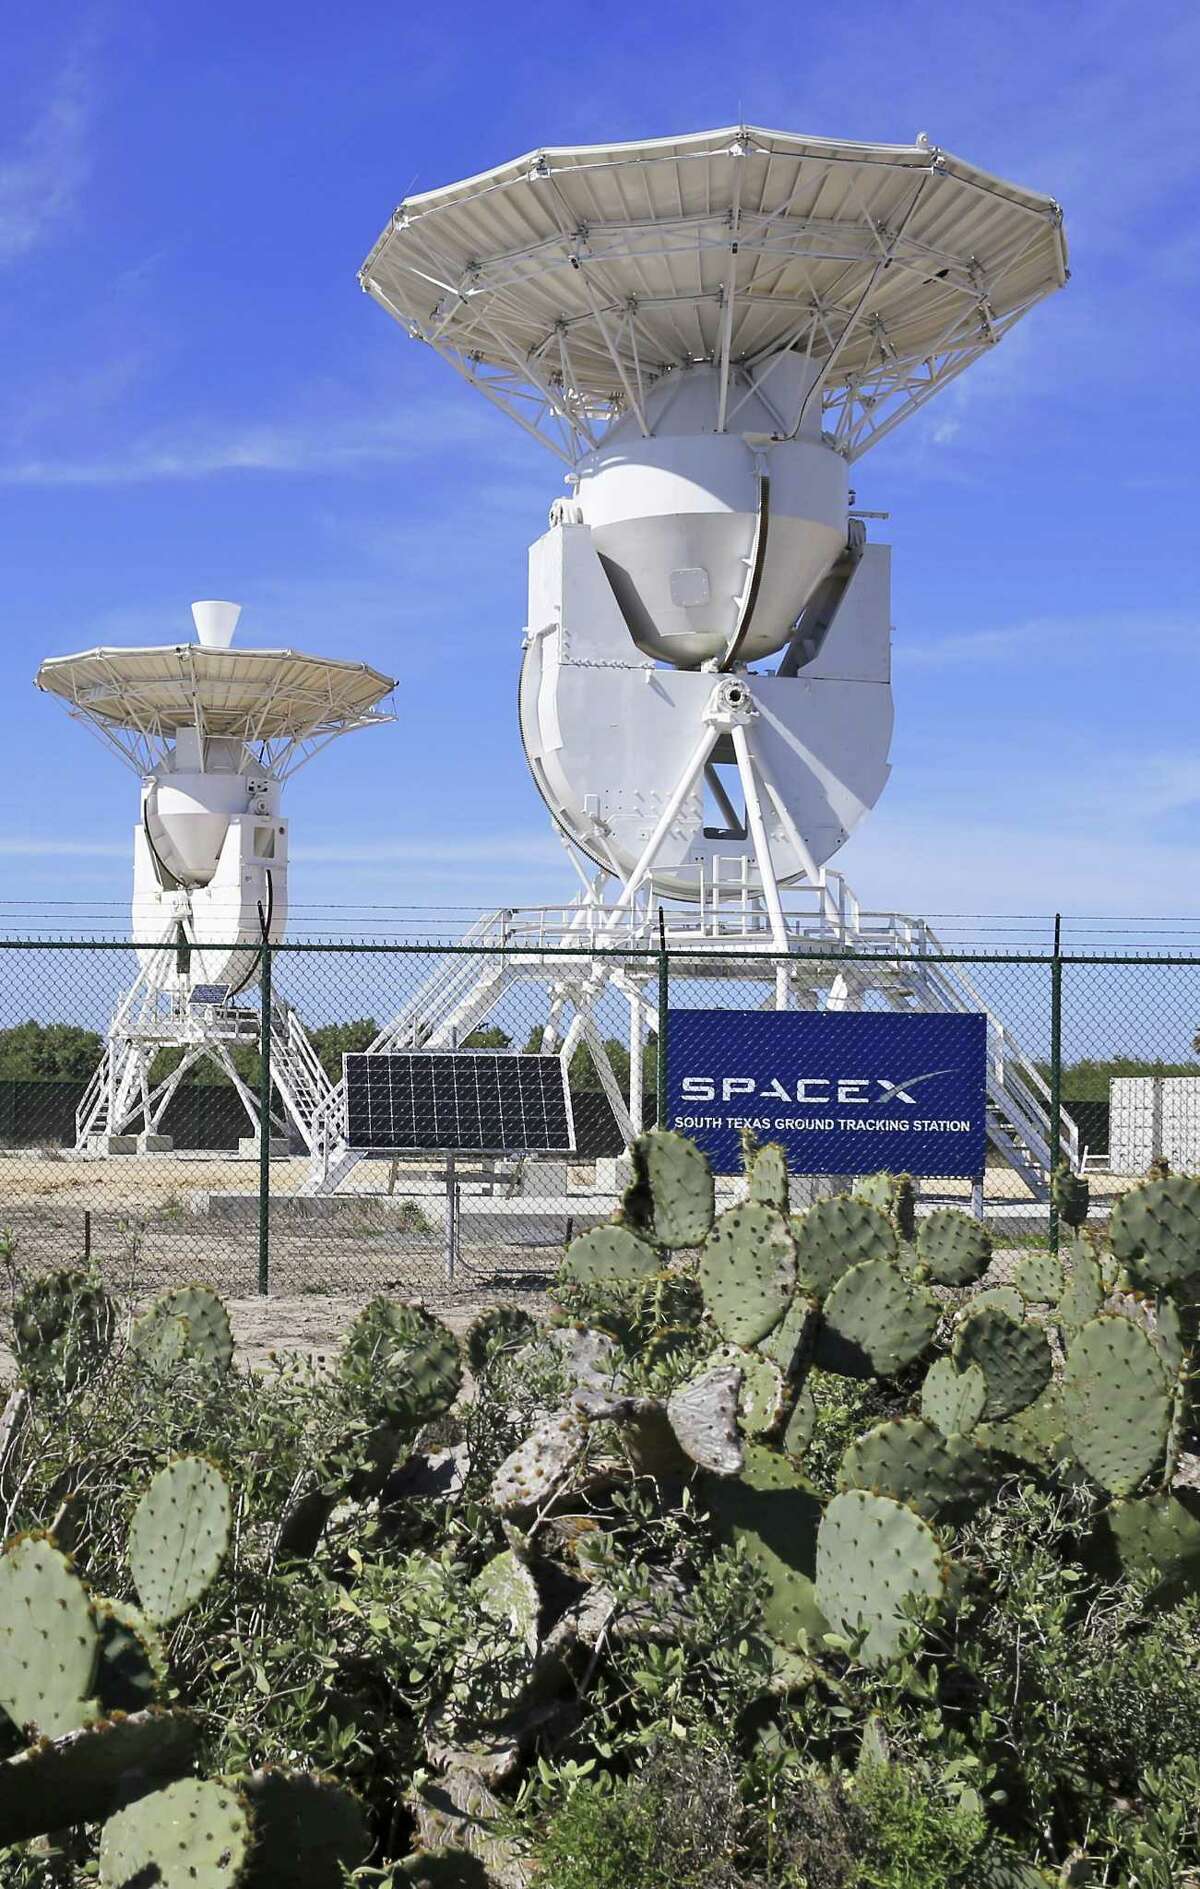 SpaceX’s South Texas Ground Tracking Station is part of the company’s Boca Chica launch site near the southern tip of Texas.